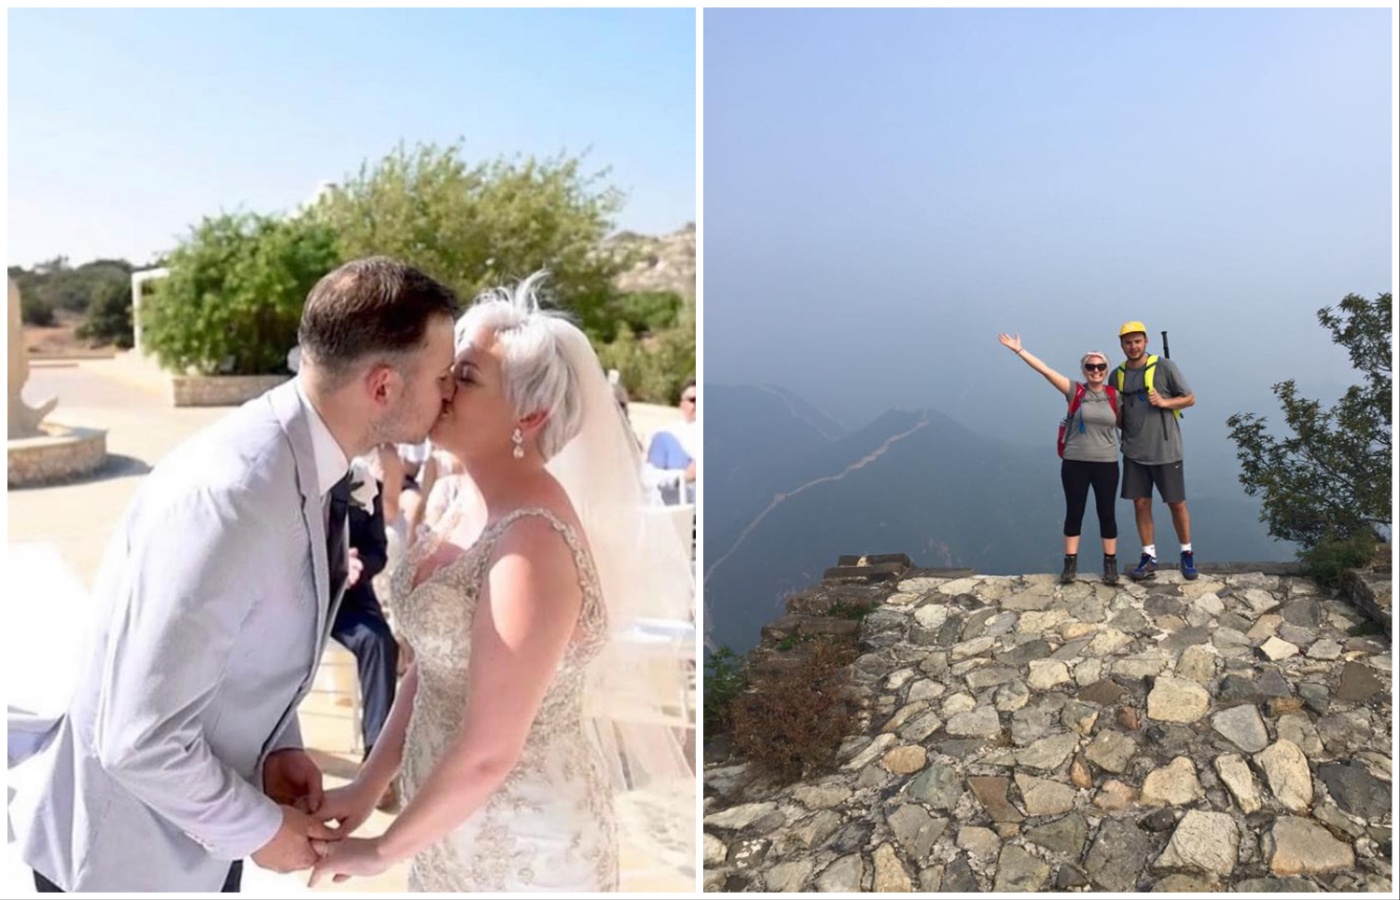 (L) Rachel and Adam on their wedding day. (R) Rachel and Adam walking the Great Wall of China.